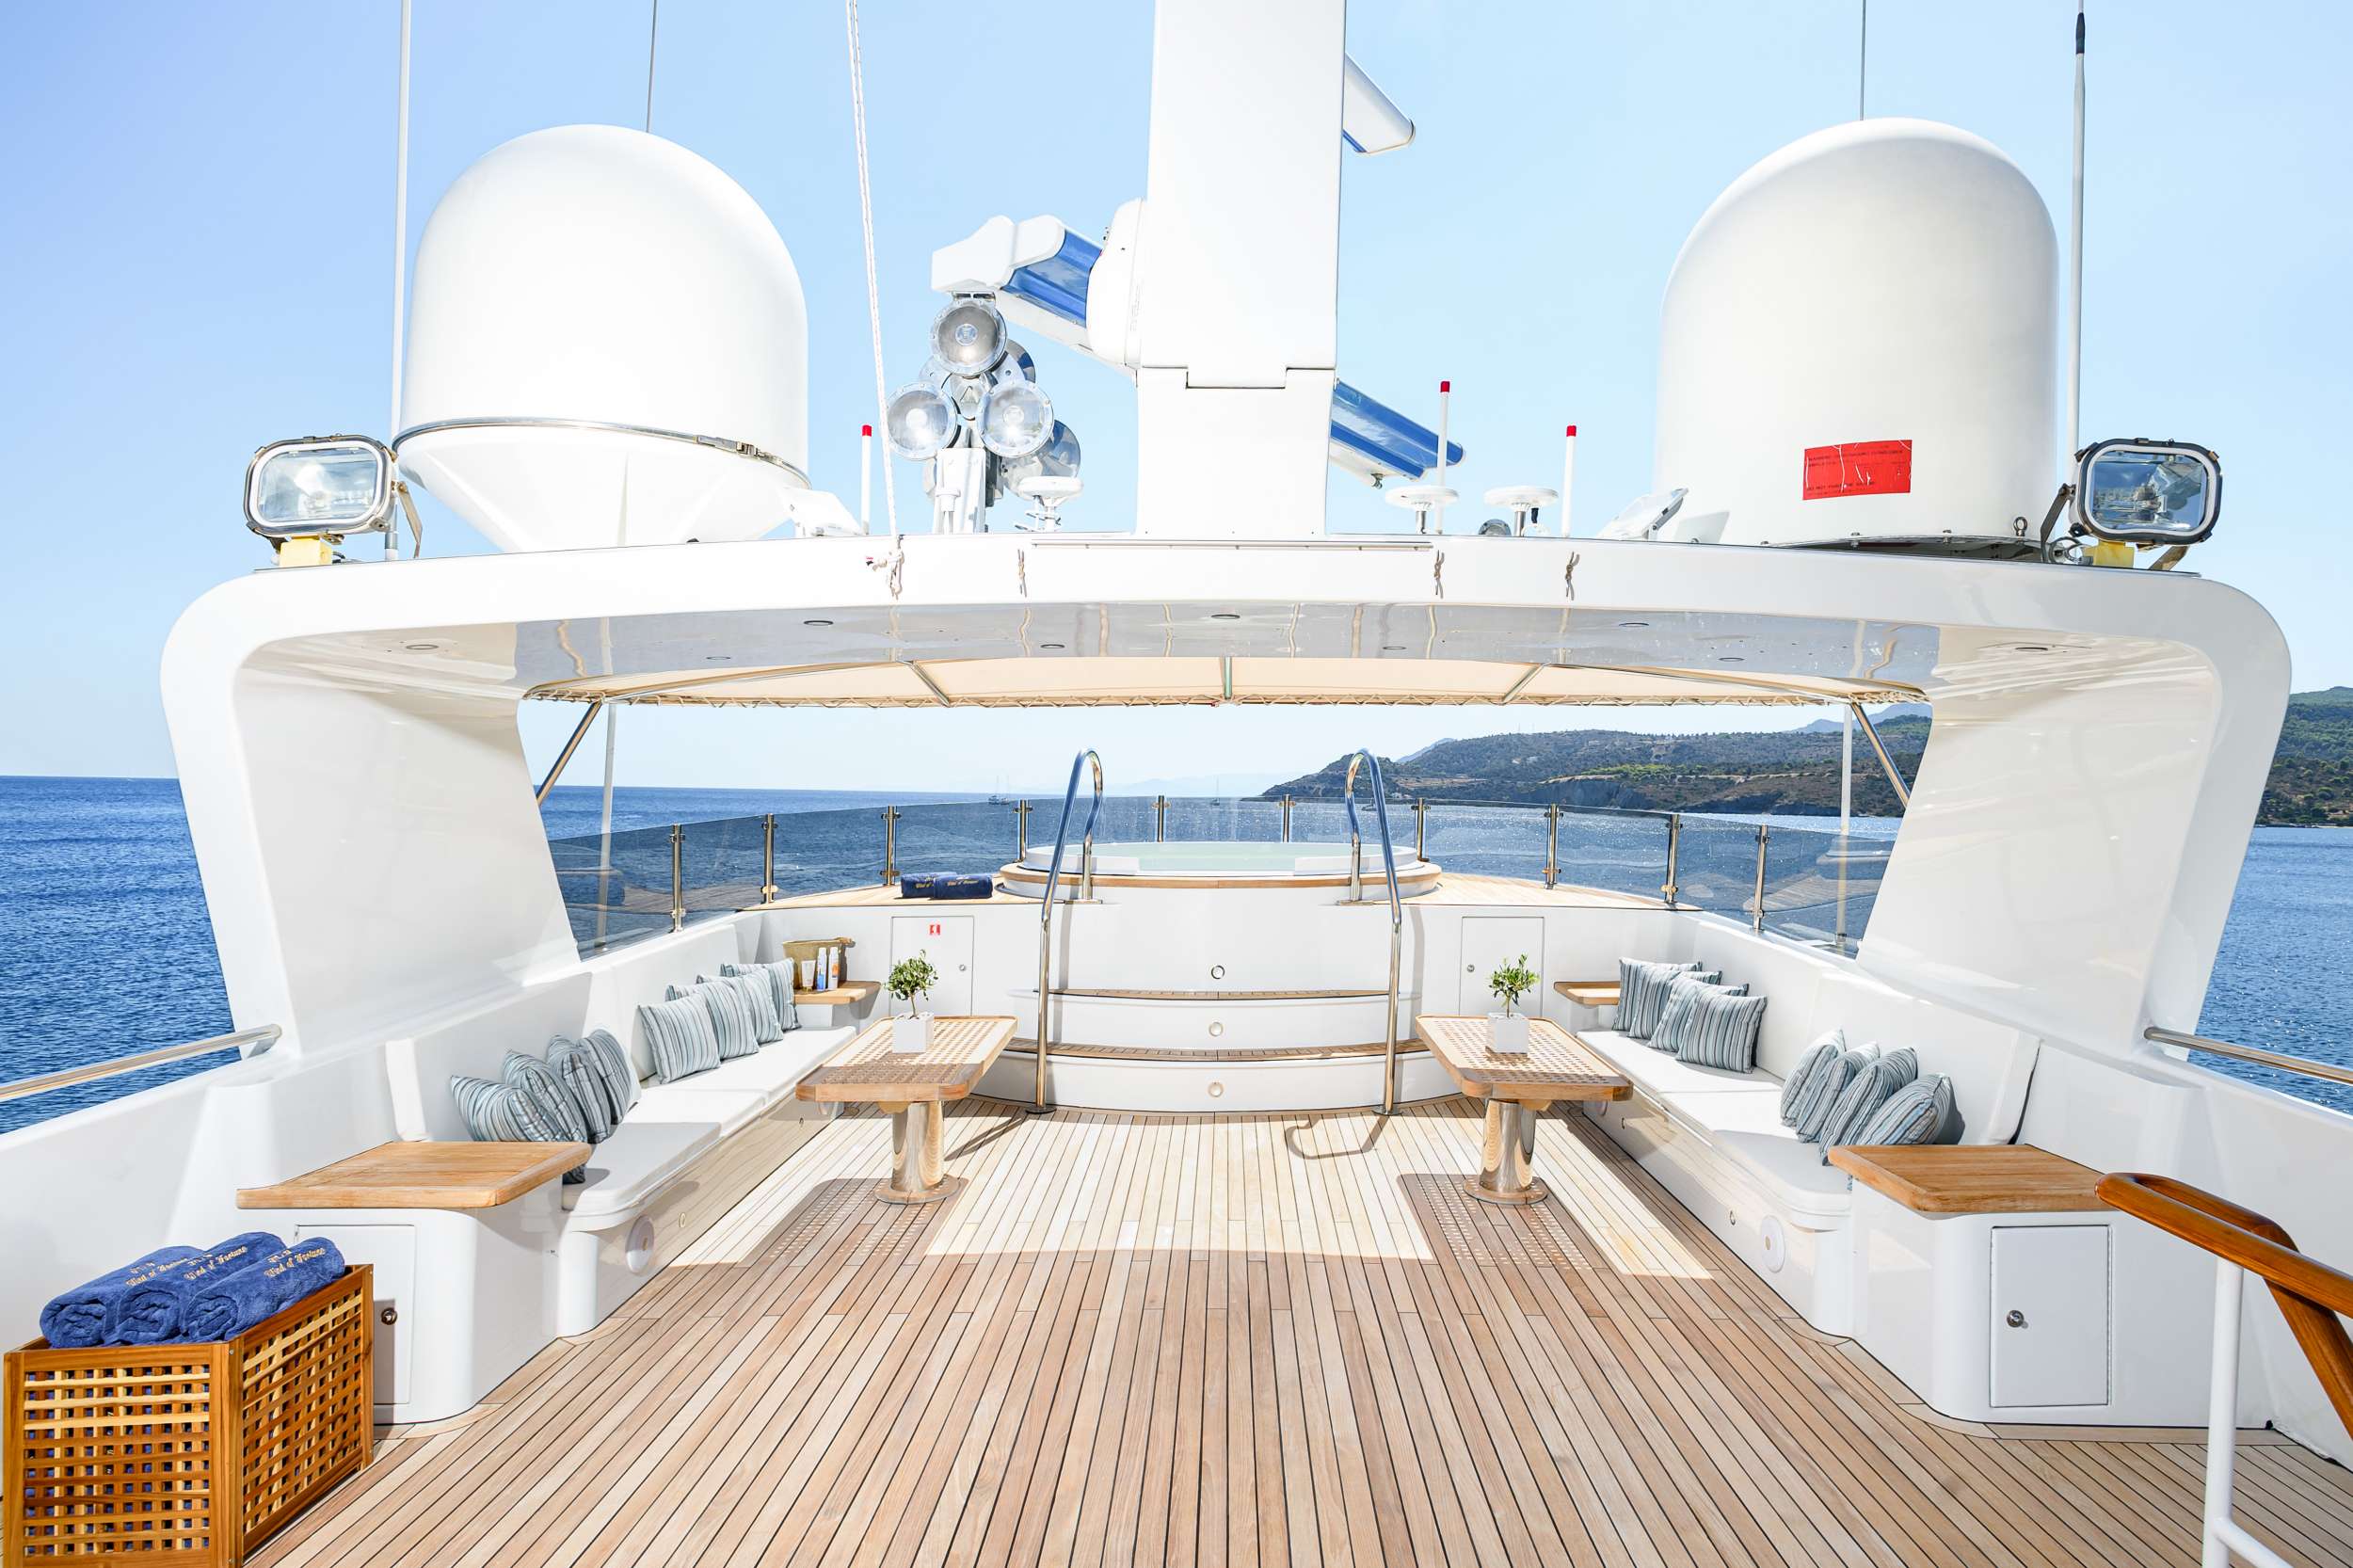 WIND OF FORTUNE - Motor Boat Charter Thailand & Boat hire in Summer: W. Med -Naples/Sicily, Greece, W. Med -Riviera/Cors/Sard., Turkey, W. Med - Spain/Balearics, Croatia | Winter: Indian Ocean and SE Asia, Red Sea, United Arab Emirates 5